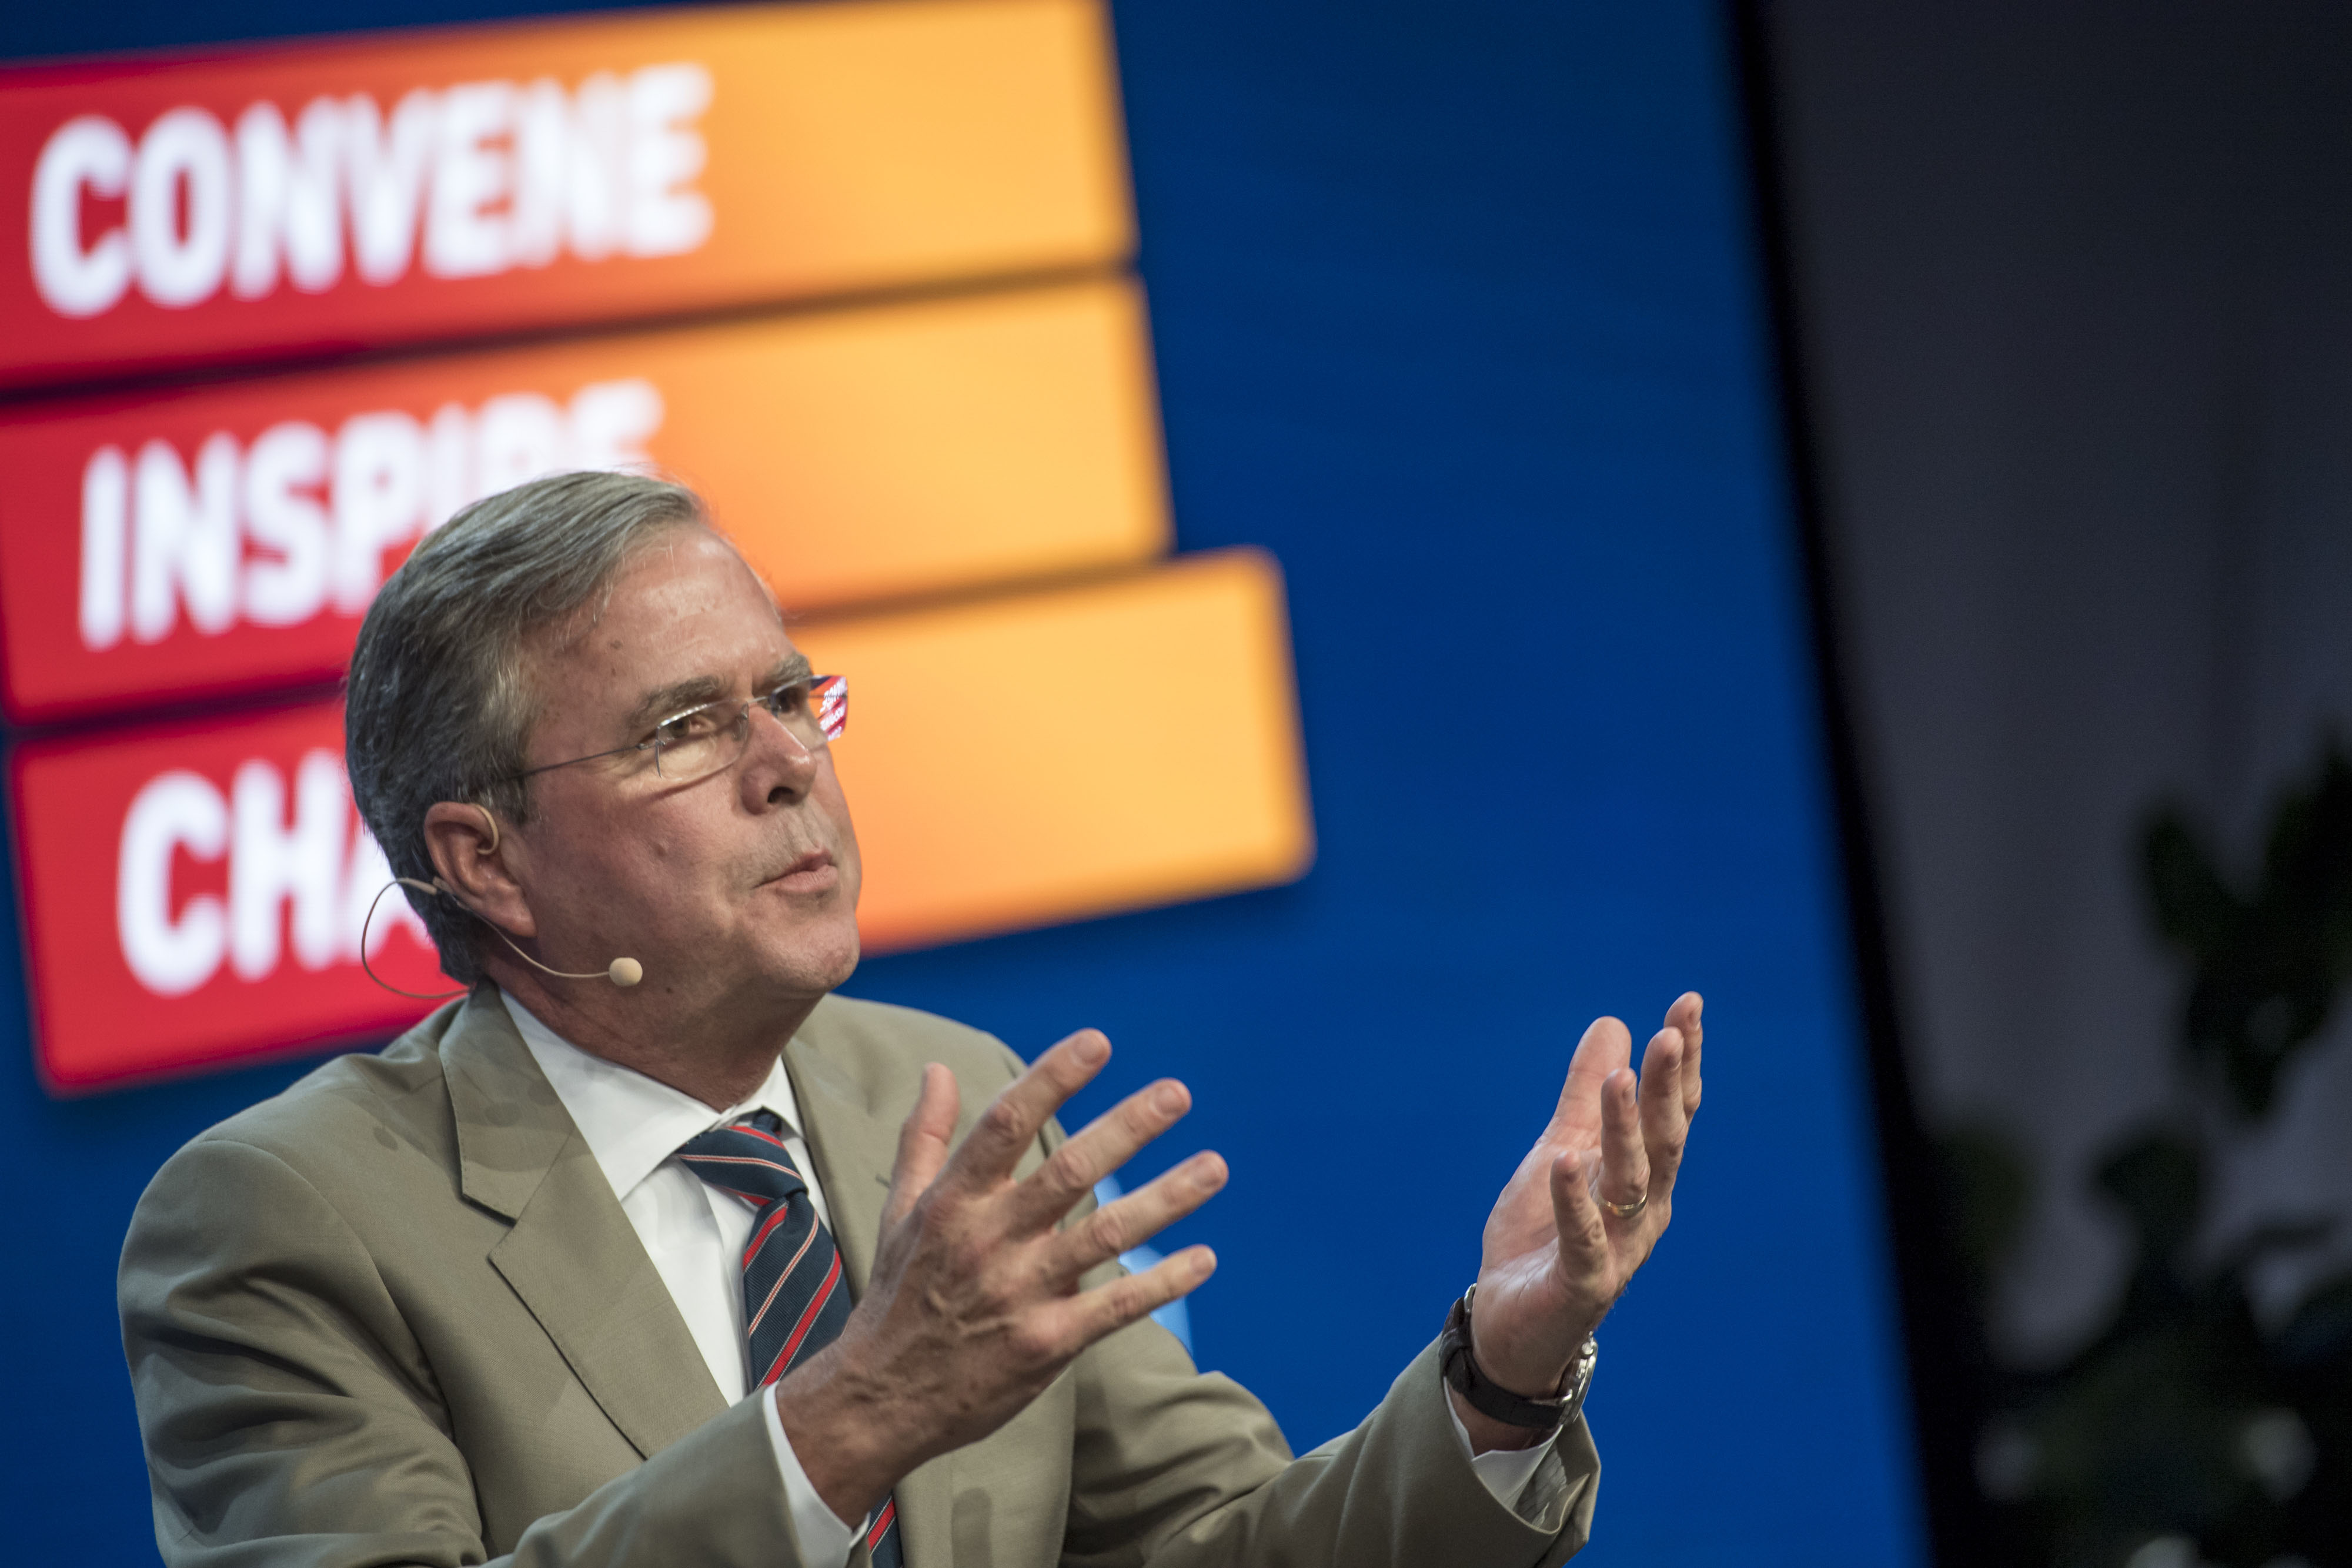 Jeb Bush, former Governor of Florida, speaks at the Milken Institute Global Conference in Beverly Hills, California, U.S., on Monday, May 1, 2017. (Bloomberg&mdash;Bloomberg via Getty Images)